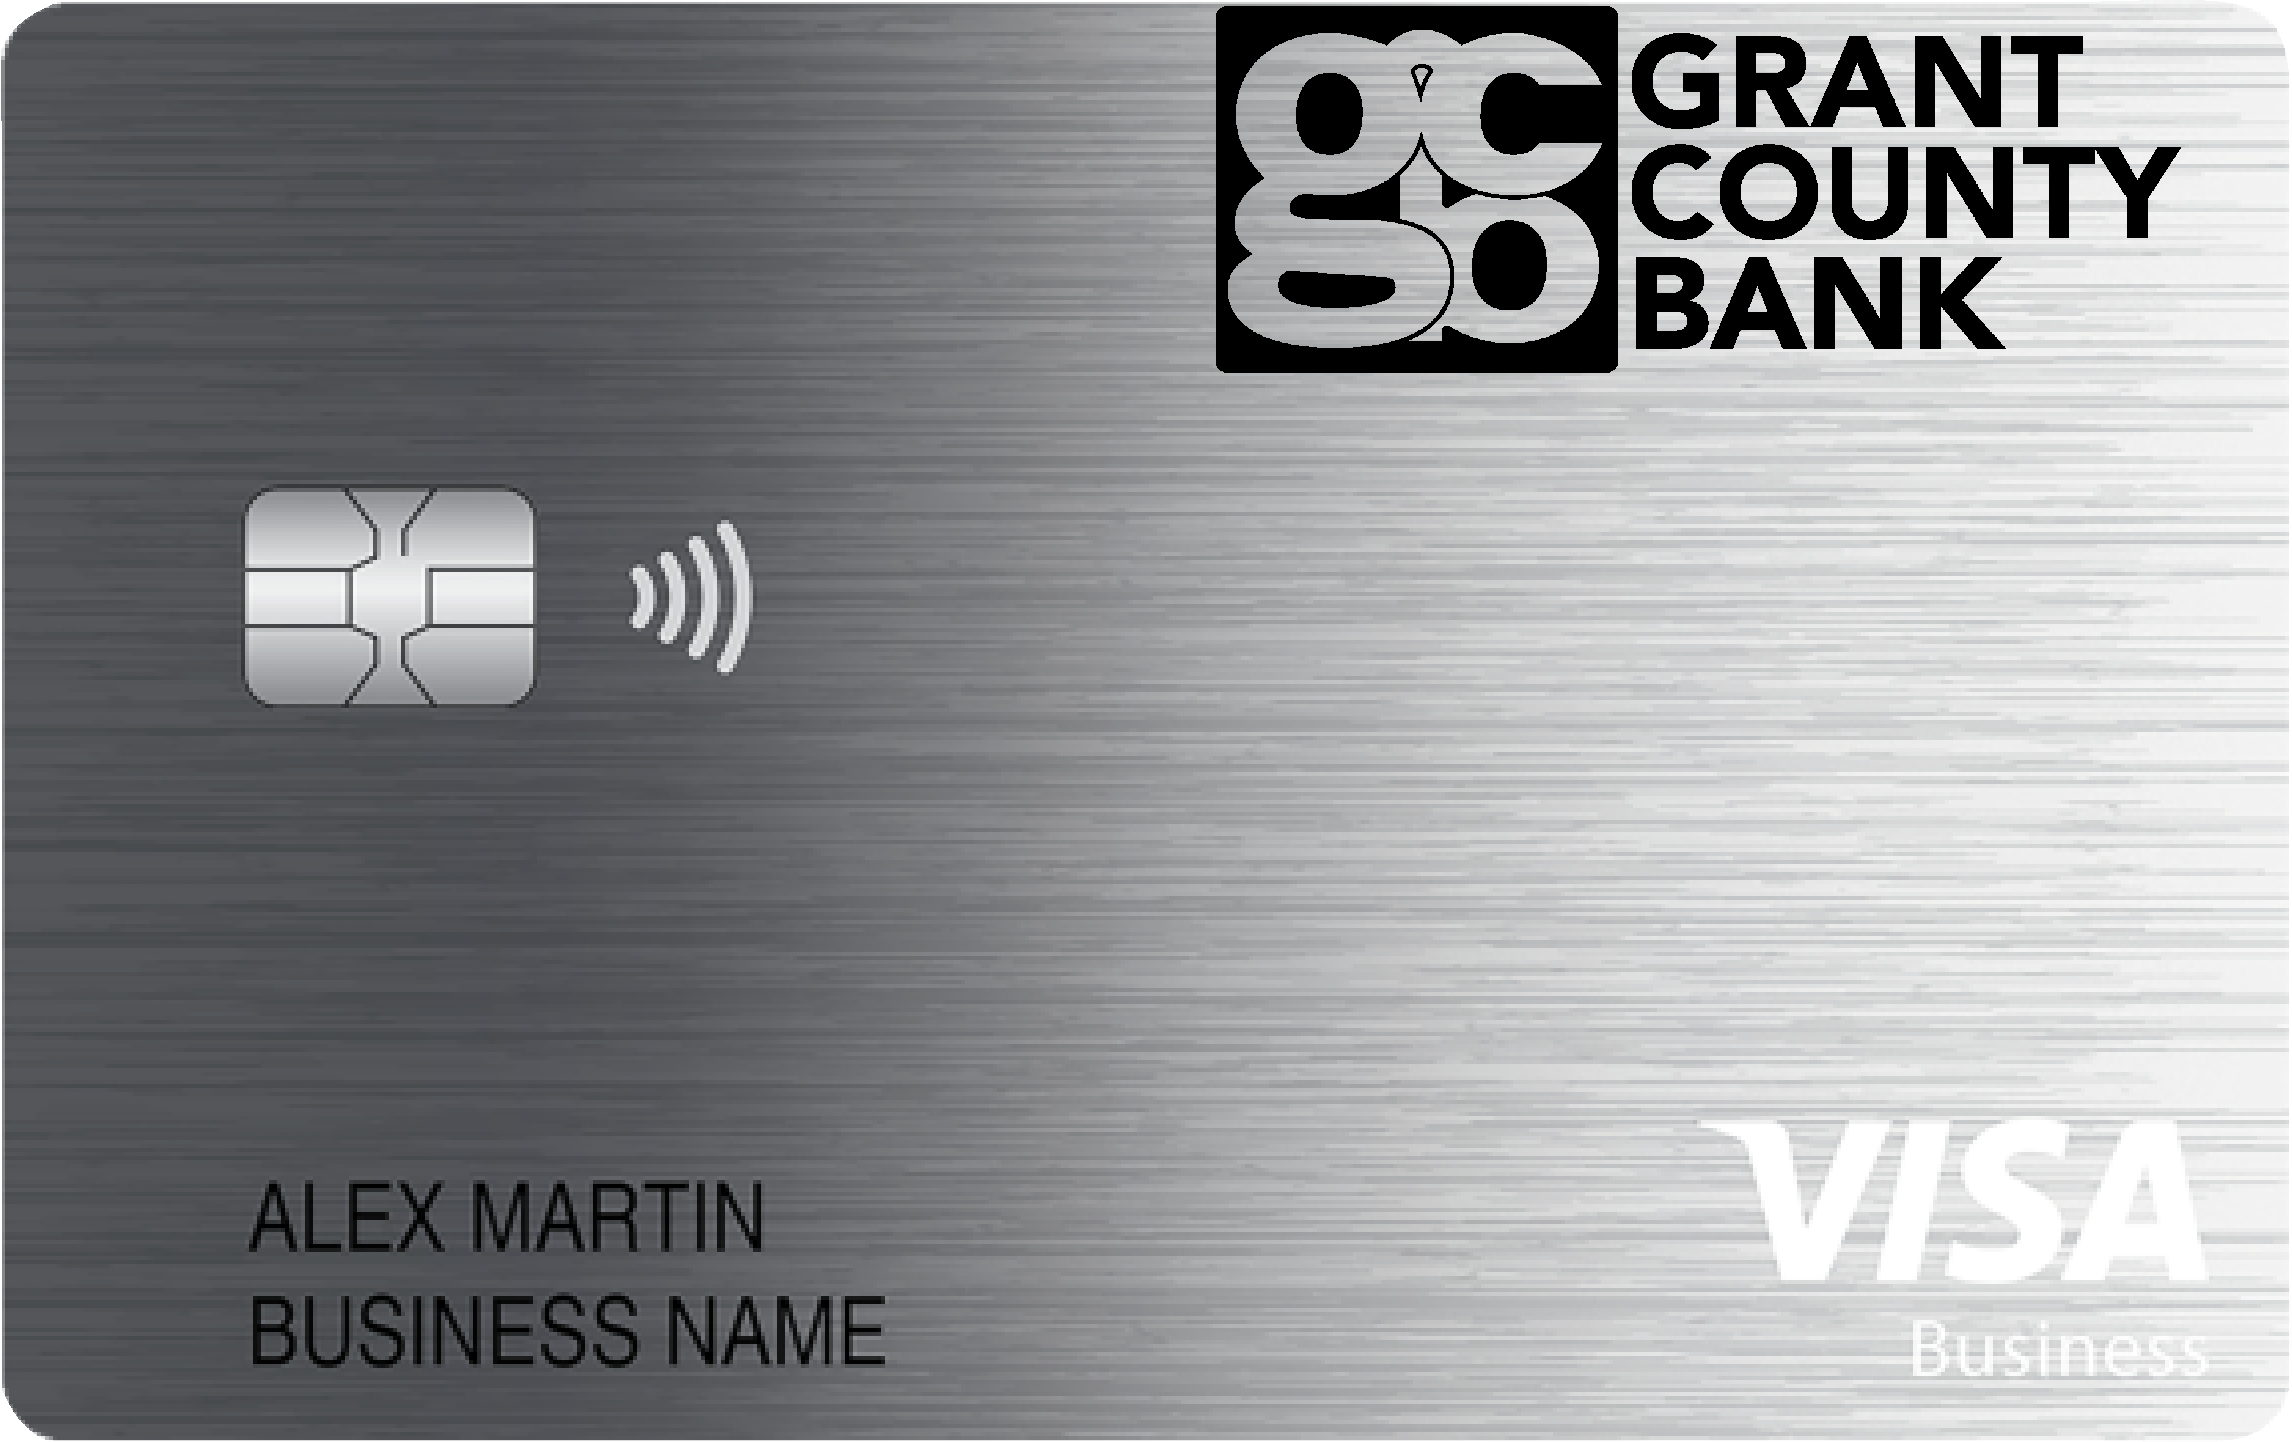 Grant County Bank Business Card Card